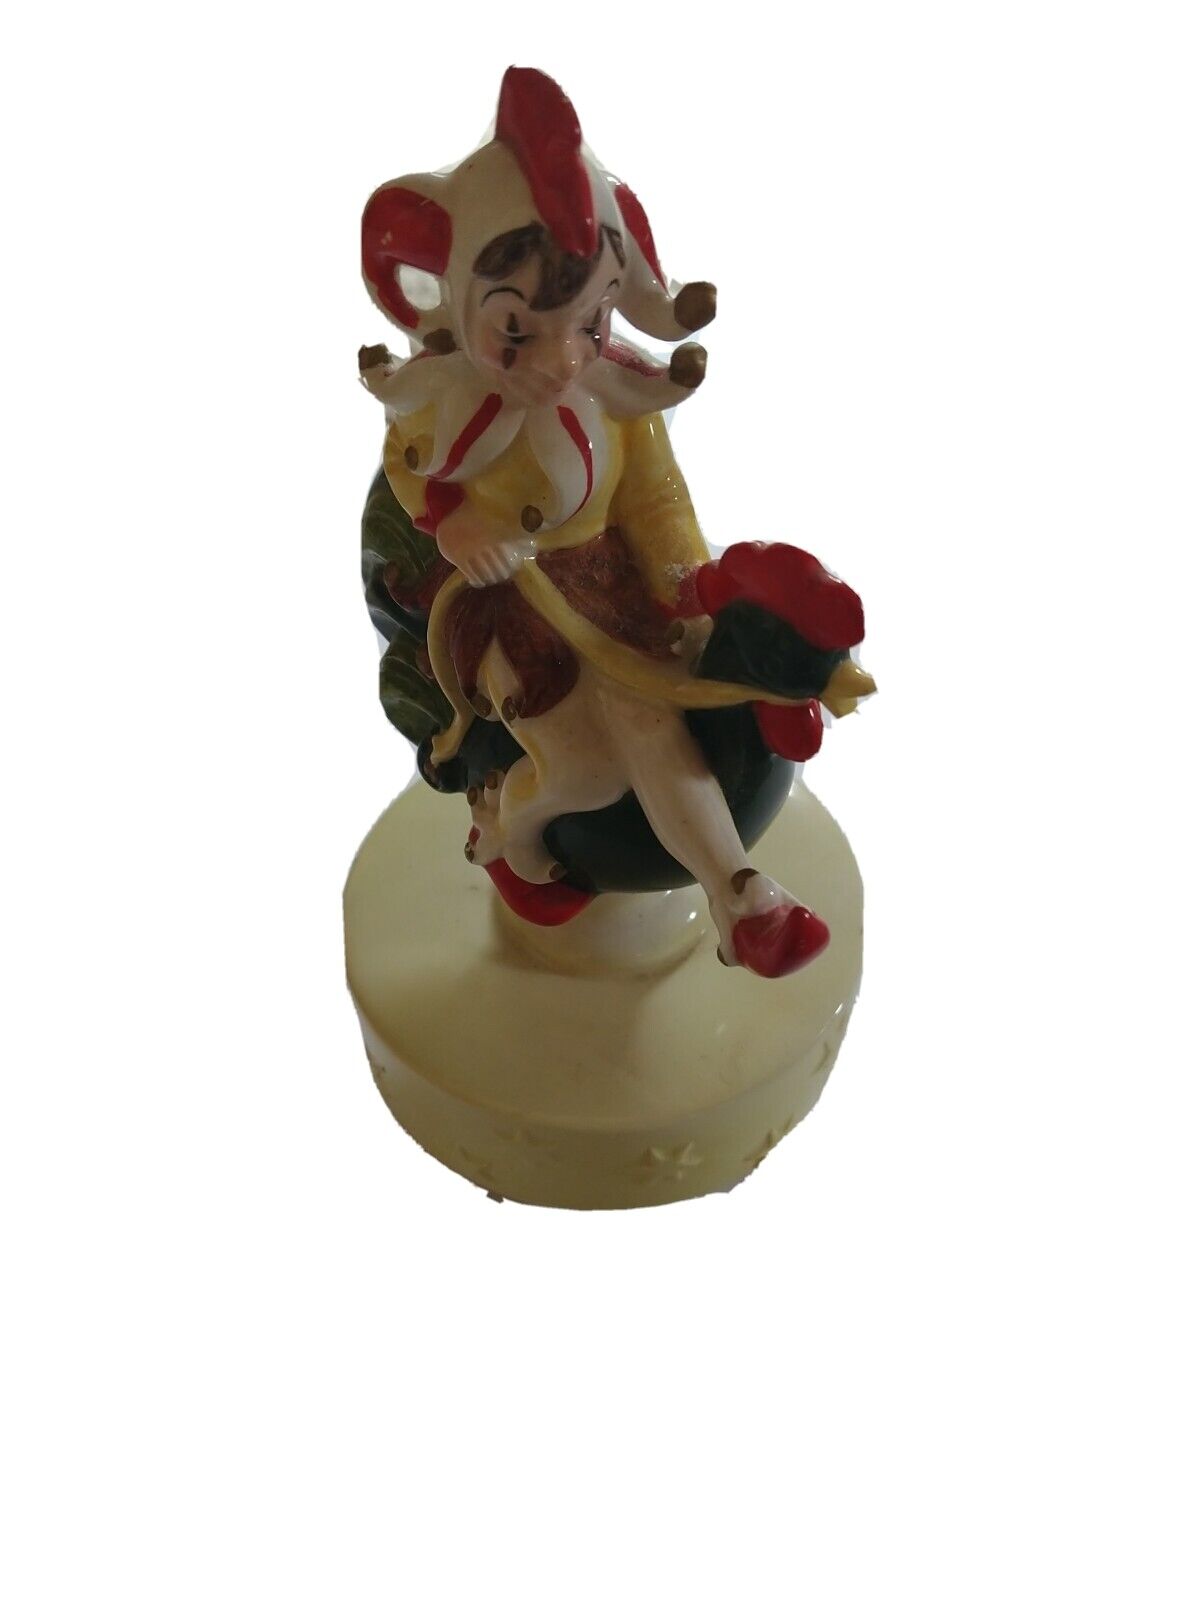 Vintage 1977 Schmid Music Box Tomorrow Jester riding a Rooster. Works great. PO